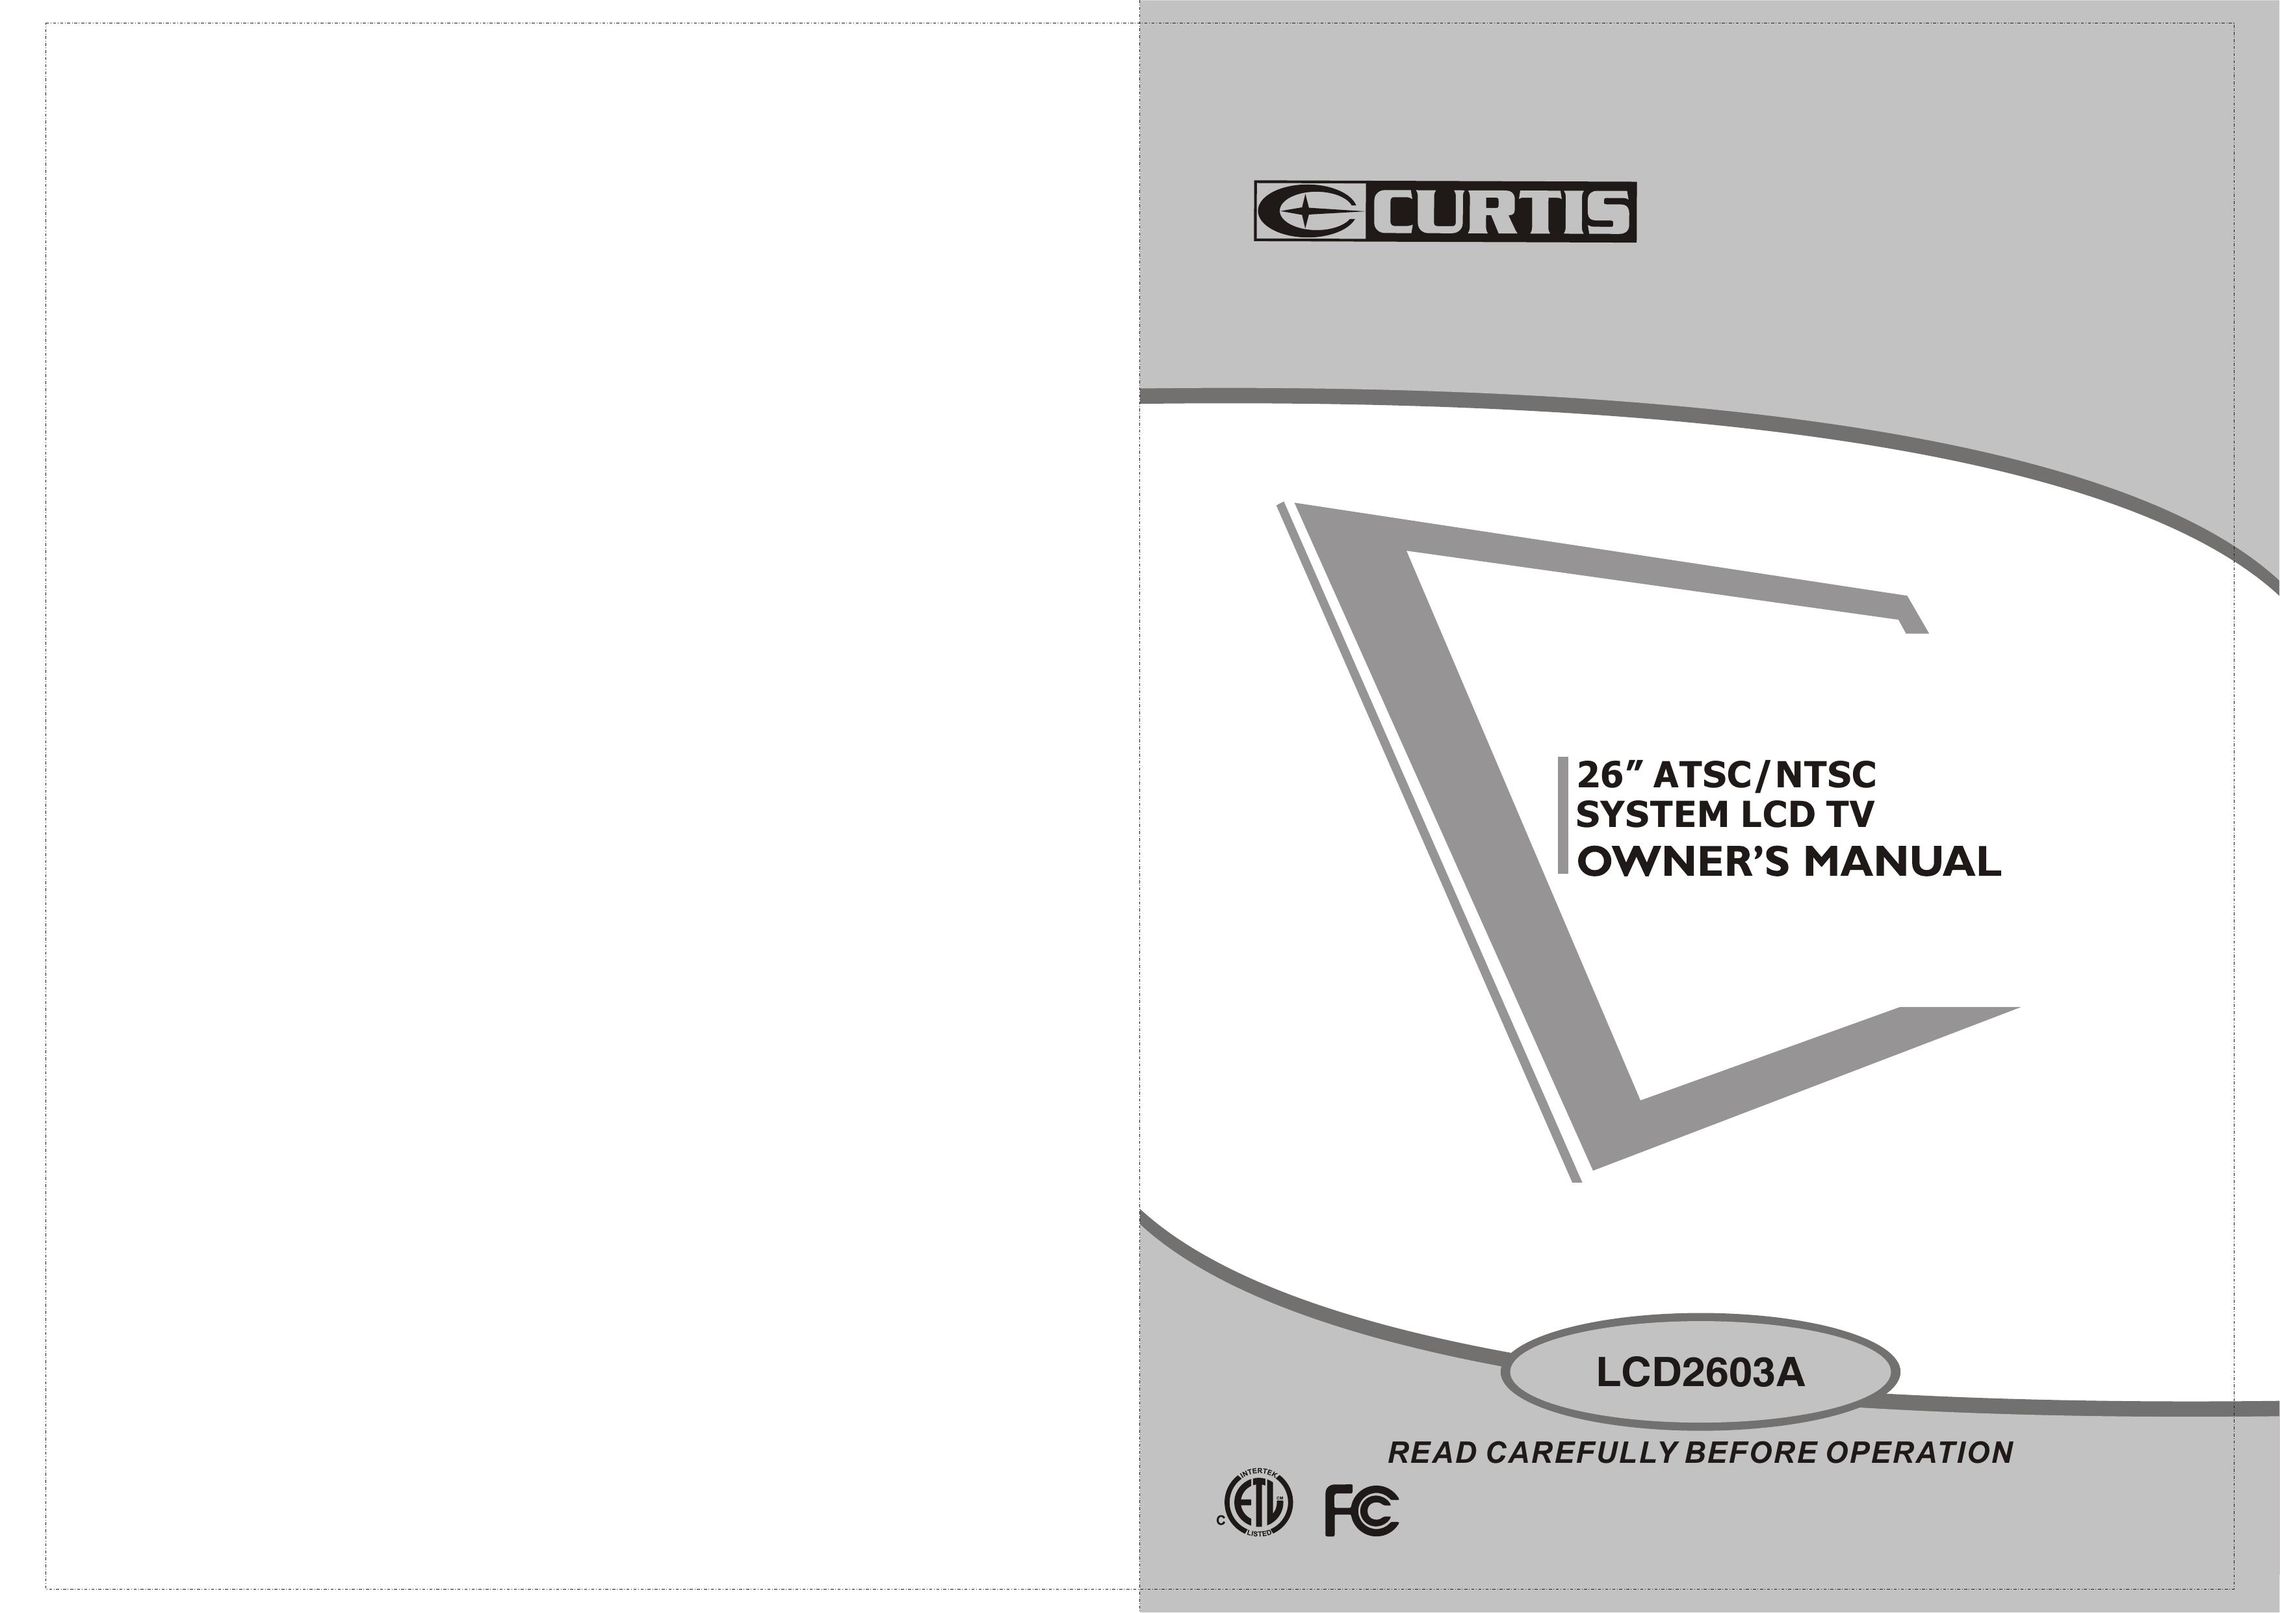 Curtis LCD2603A Flat Panel Television User Manual